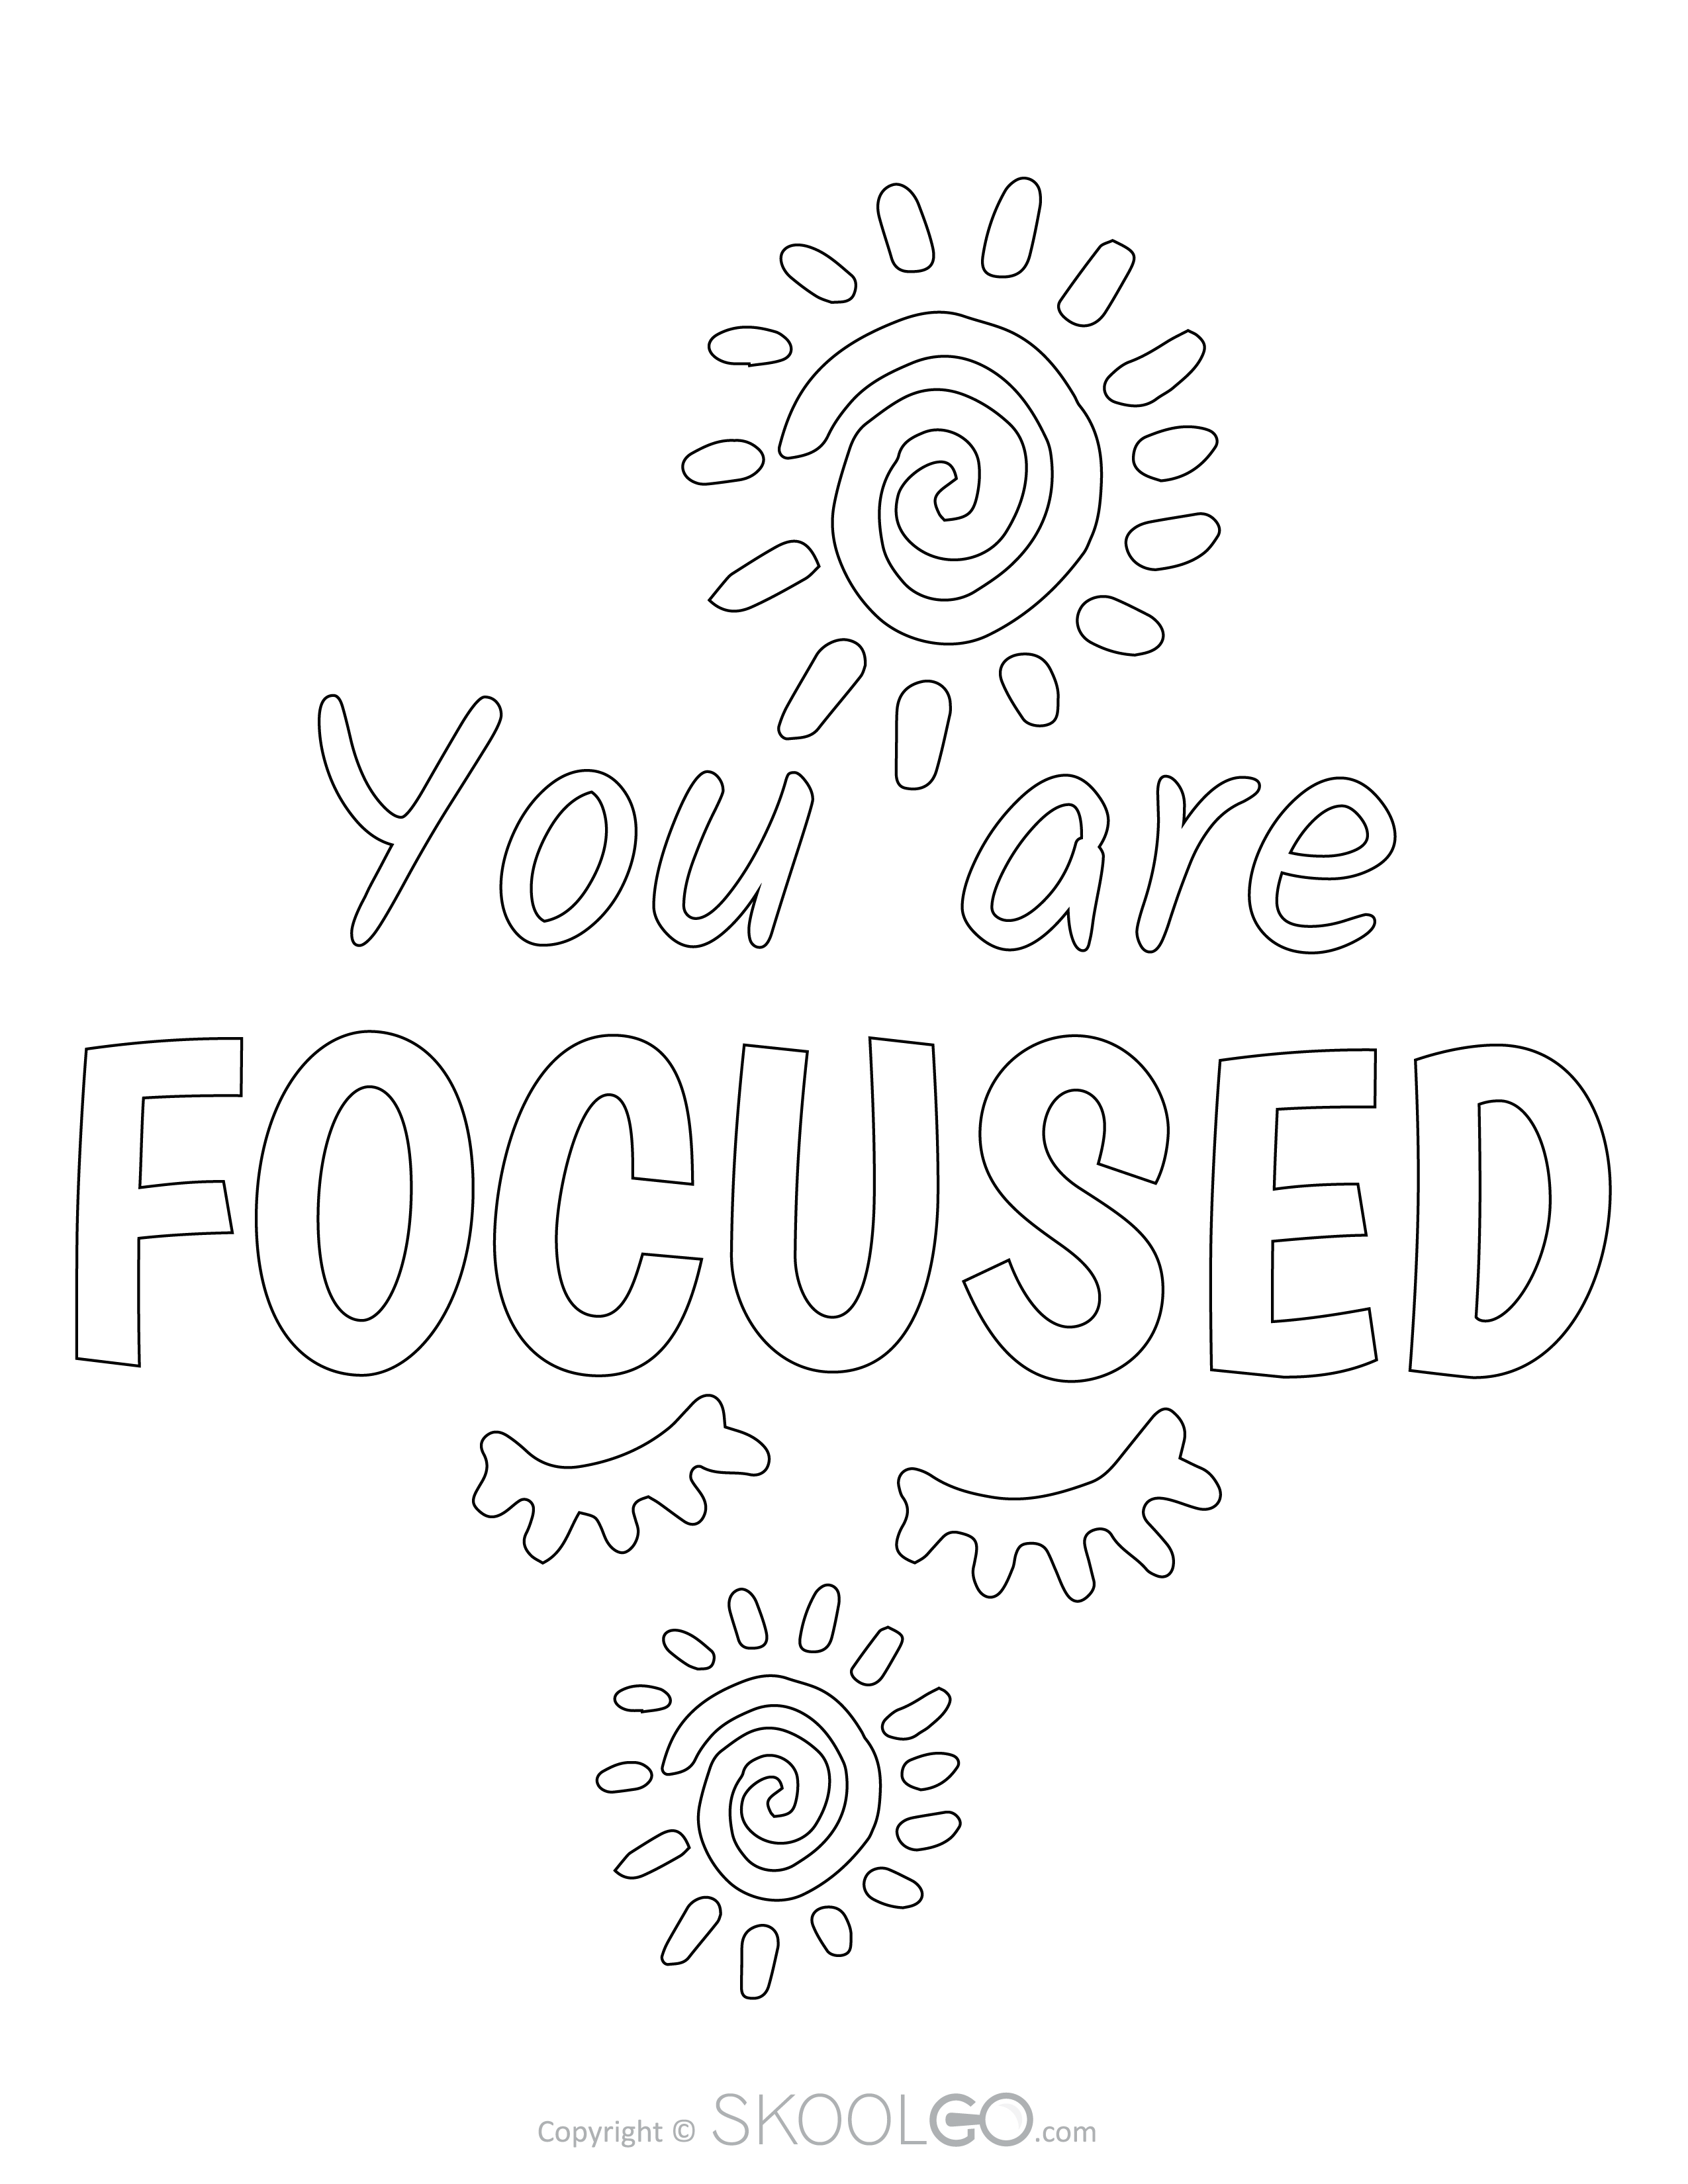 You Are Focused - Free Coloring Version Poster